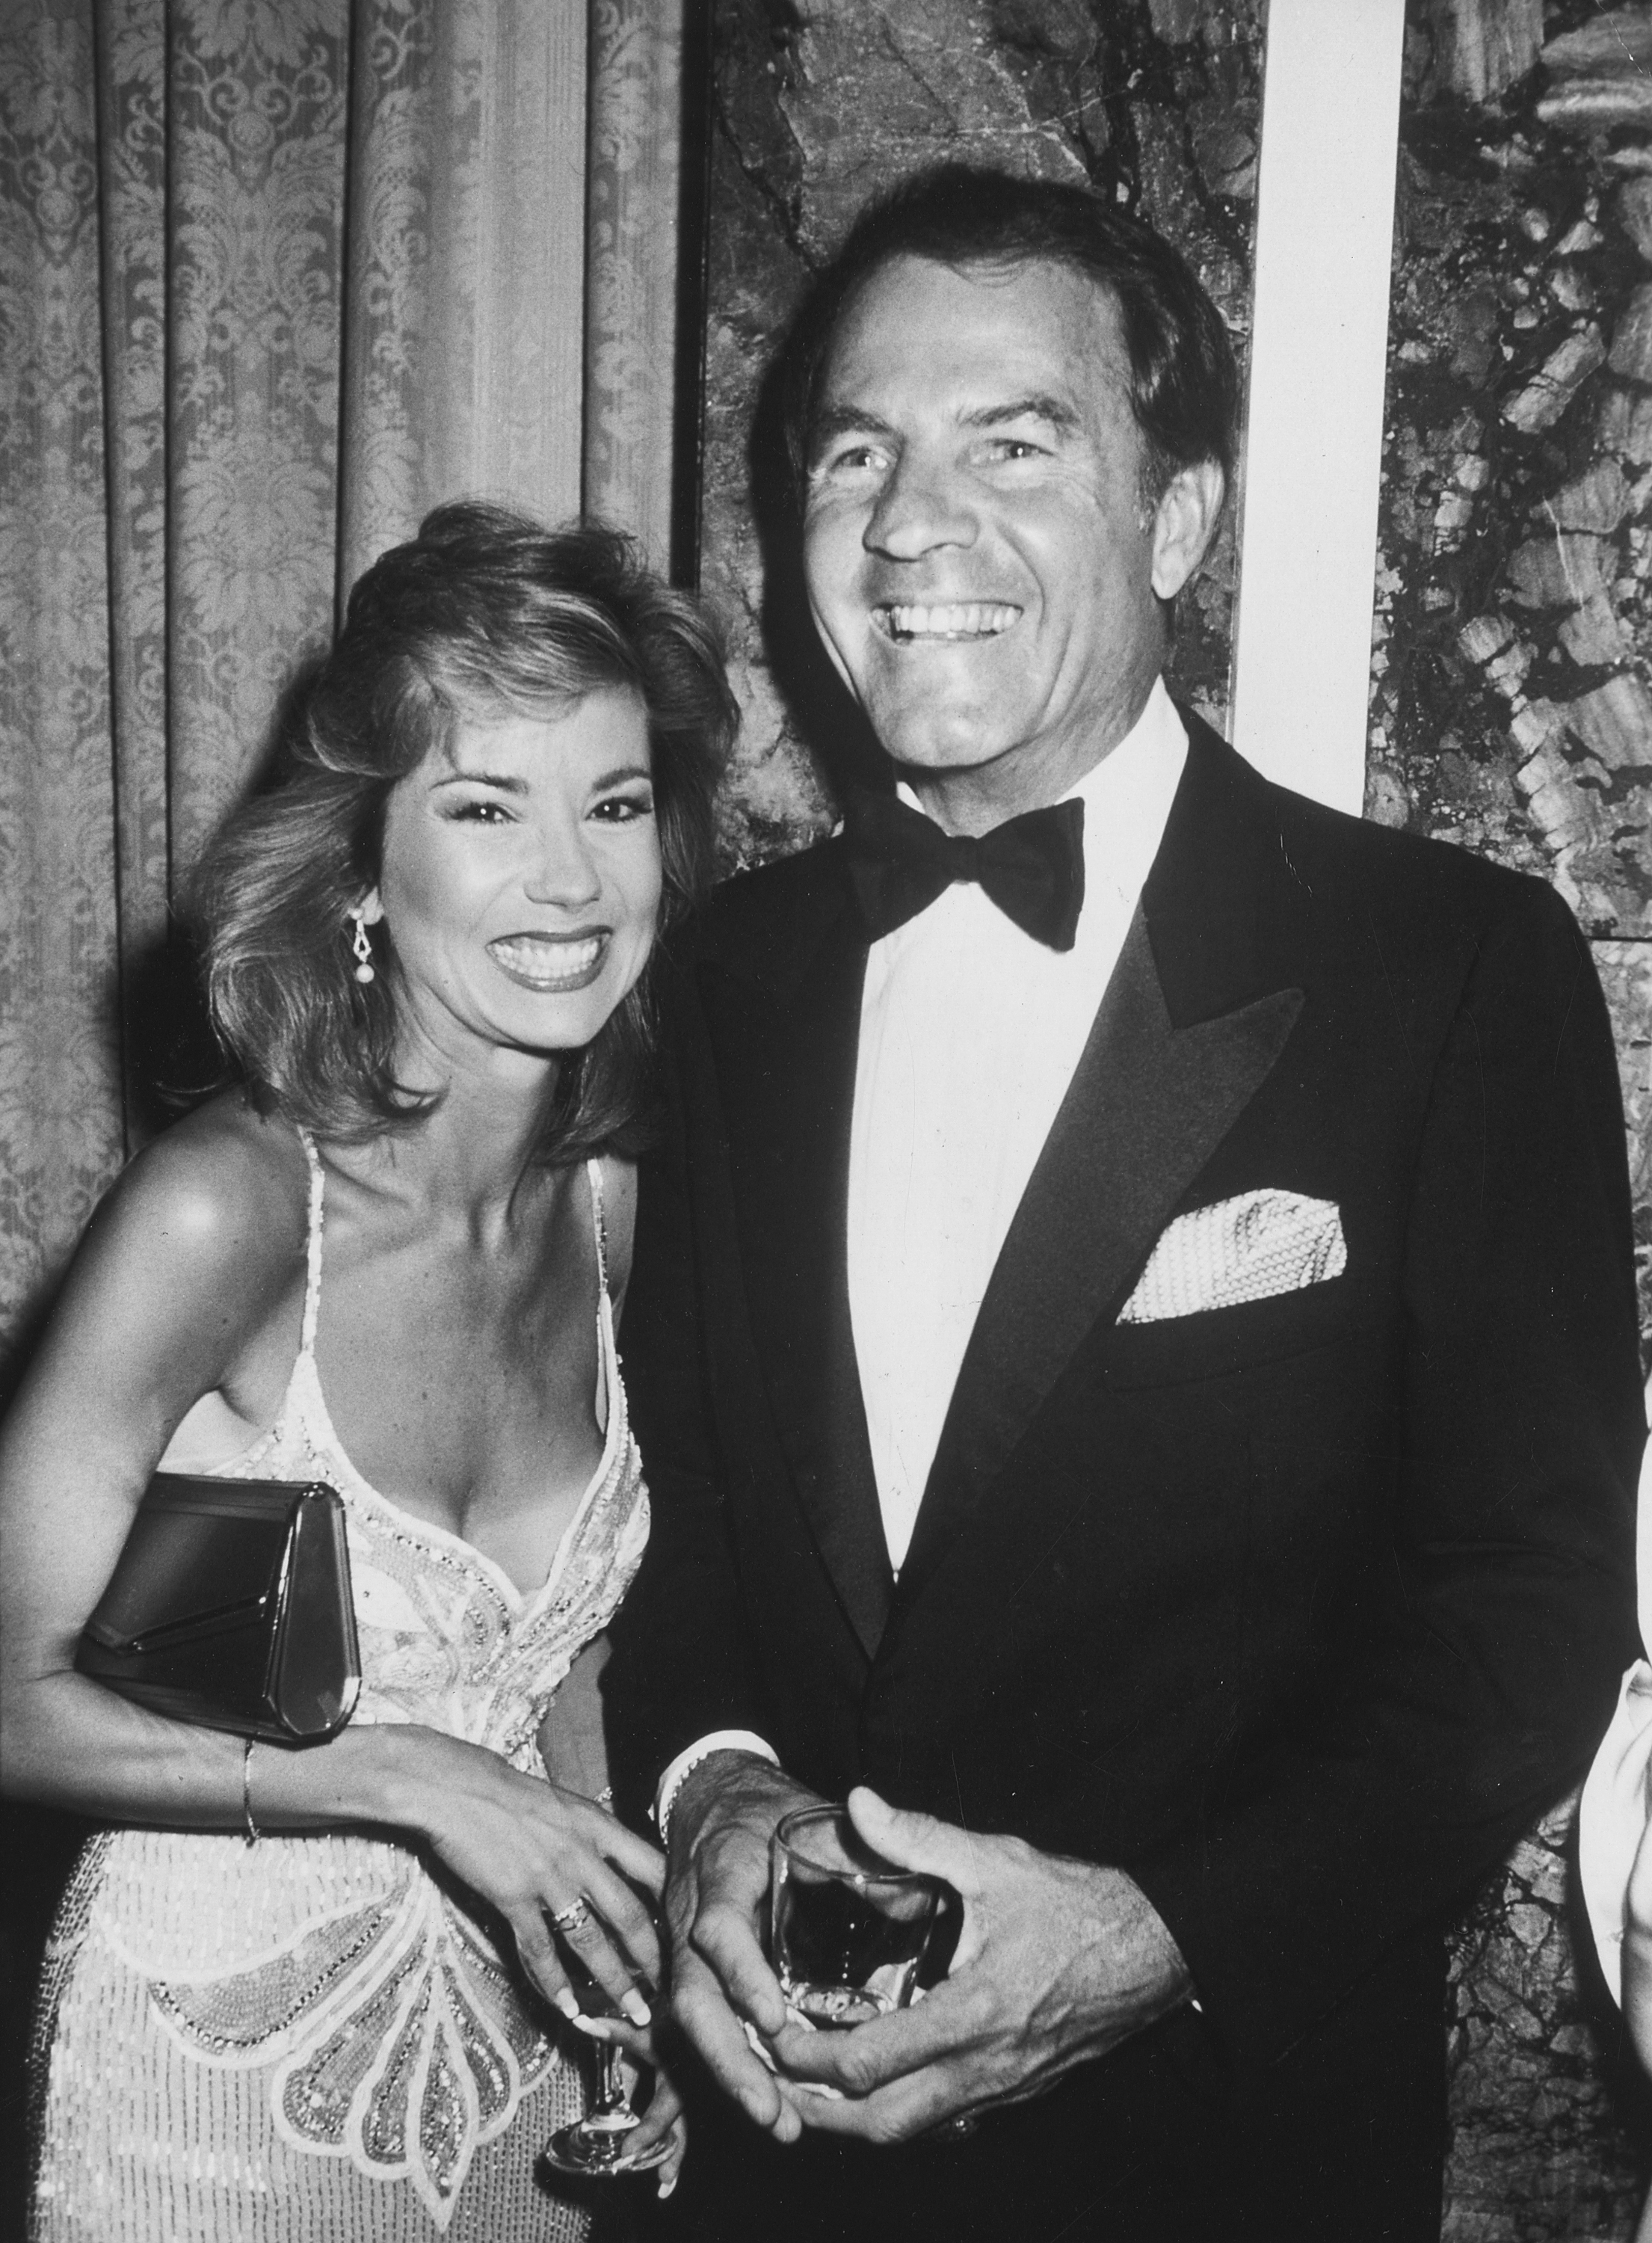 Kathie Lee Johnson and Frank Gifford attend the B'nai B'rith International Awards Dinner honoring Walter Annenberg on June 24, 1986 at the Waldorf Hotel in New York City, New York | Source: Getty Images